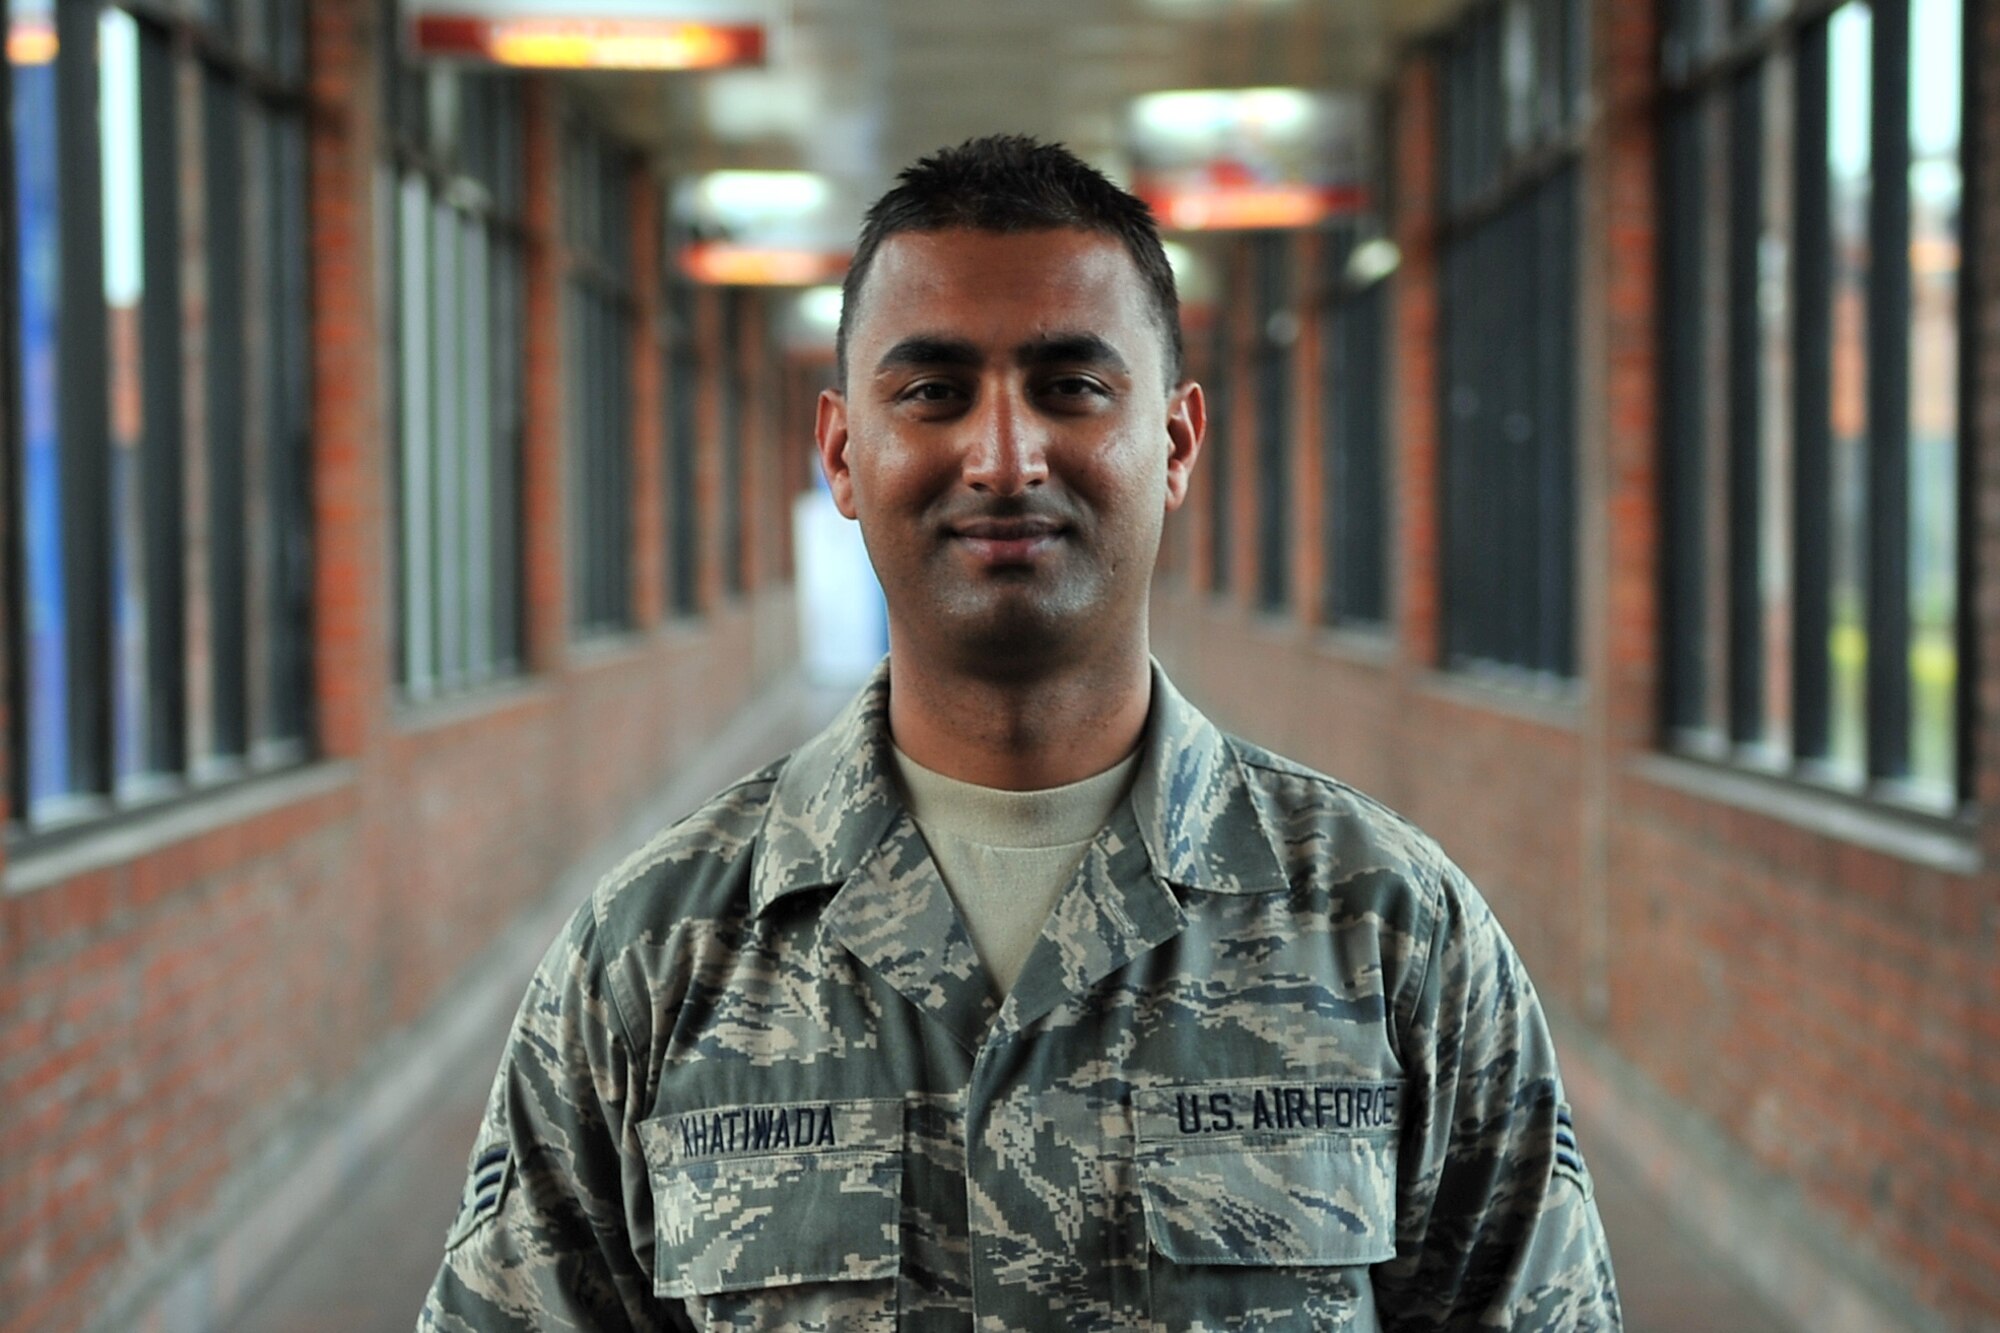 U.S. Air Force Senior Airman Manoj Khatiwada, 21st Medical Operations Squadron aerospace medical technician, stands in the terminal at the Tribhuvan International Airport in Kathmandu, Nepal, May 8, 2015. Manoj joined a team from the 36th Contingency Response Group to assist U.S. Air Force, U.S. Department of State and U.S. Agency for International Development operations by assisting with communicating with the Nepalese Army as they process relief supplies following a magnitude 7.8 earthquake that struck the region April 25, 2015. (U.S. Air Force photo by Staff Sgt. Melissa White/Released)